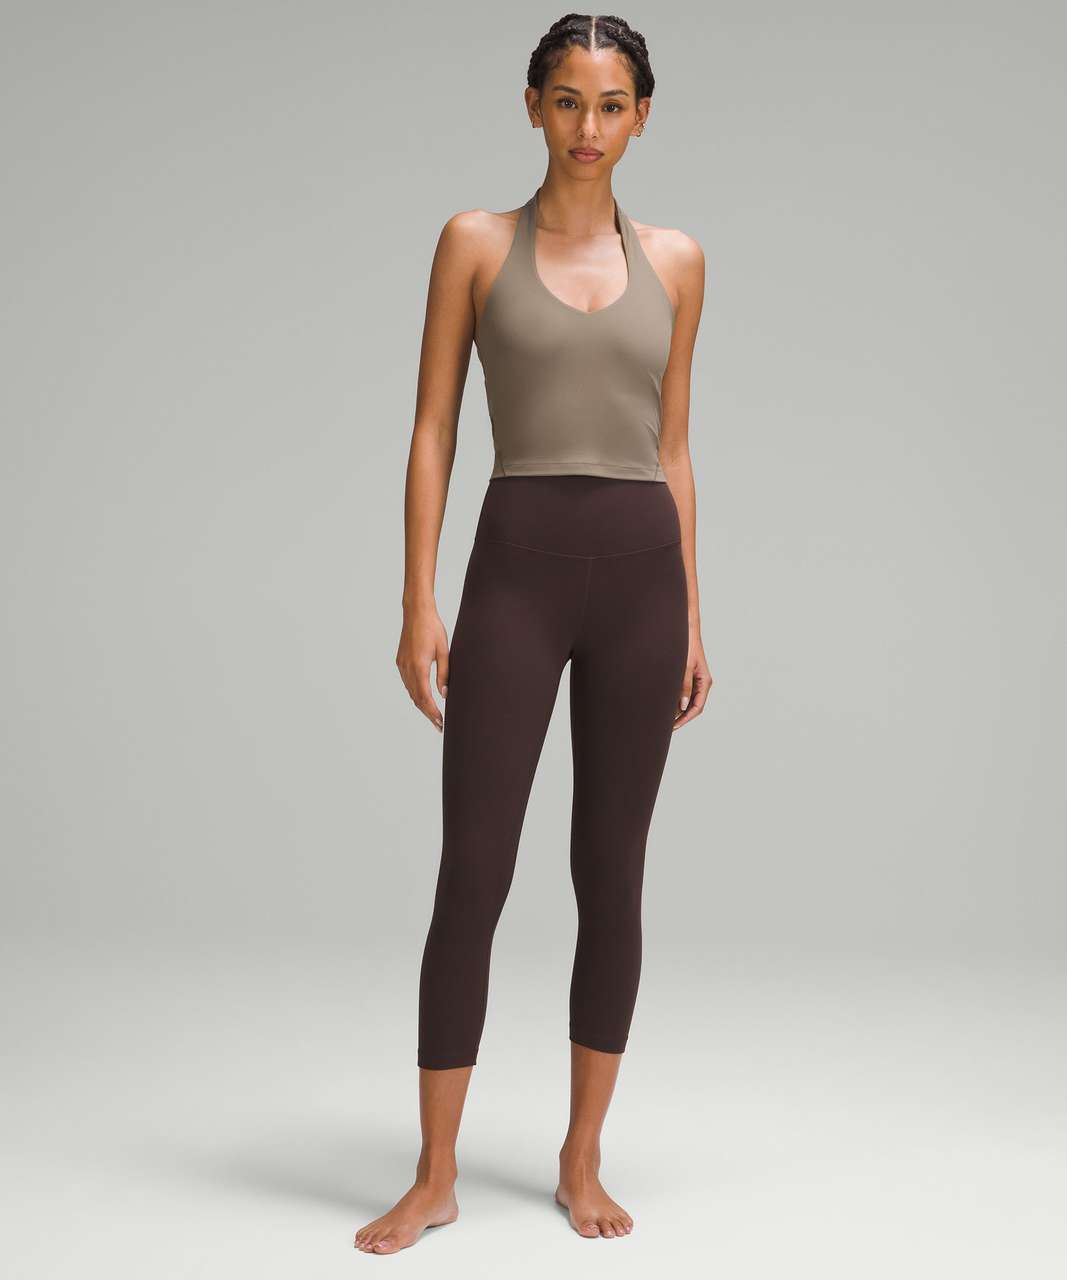 A Full lululemon Align Tank Review + Our Top 5 alternatives - The Yoga  Nomads